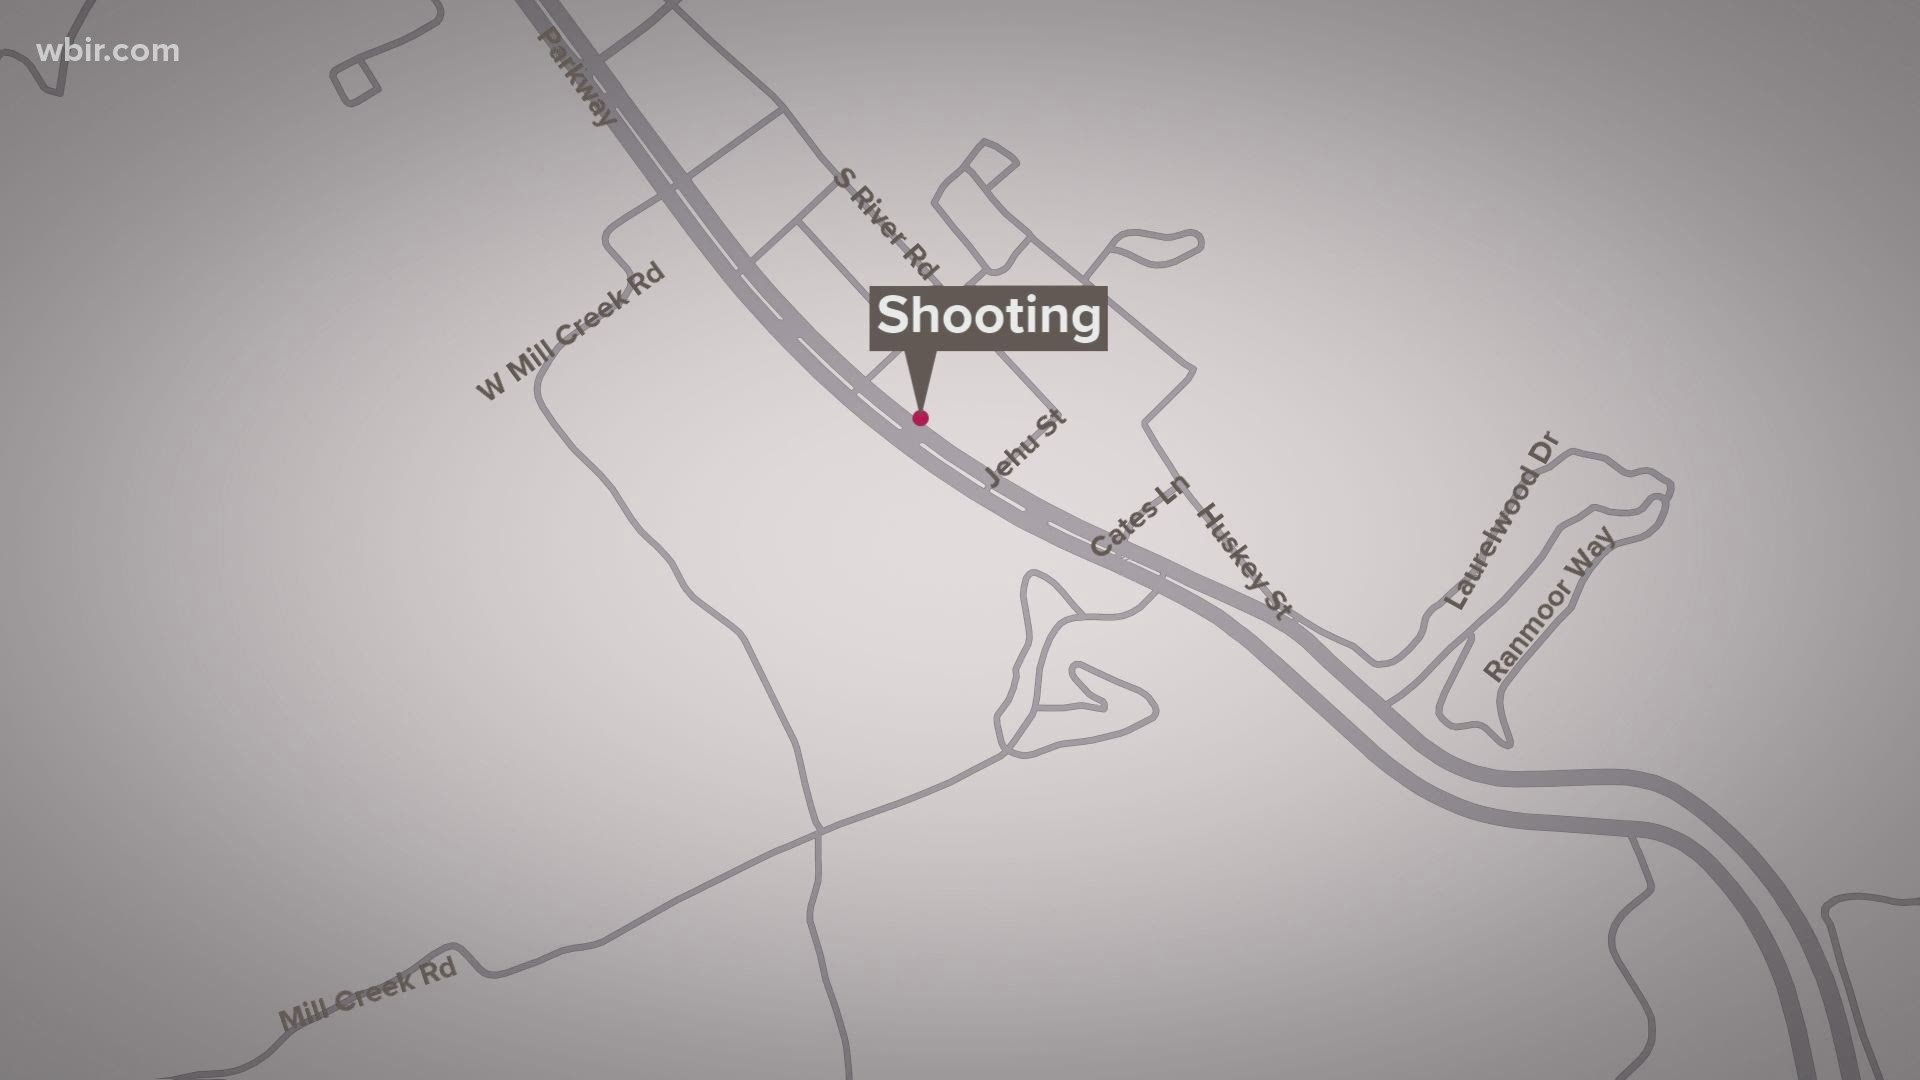 The Pigeon Forge Police Department said no injuries were reported after a shooting incident at a Pilot parking lot.